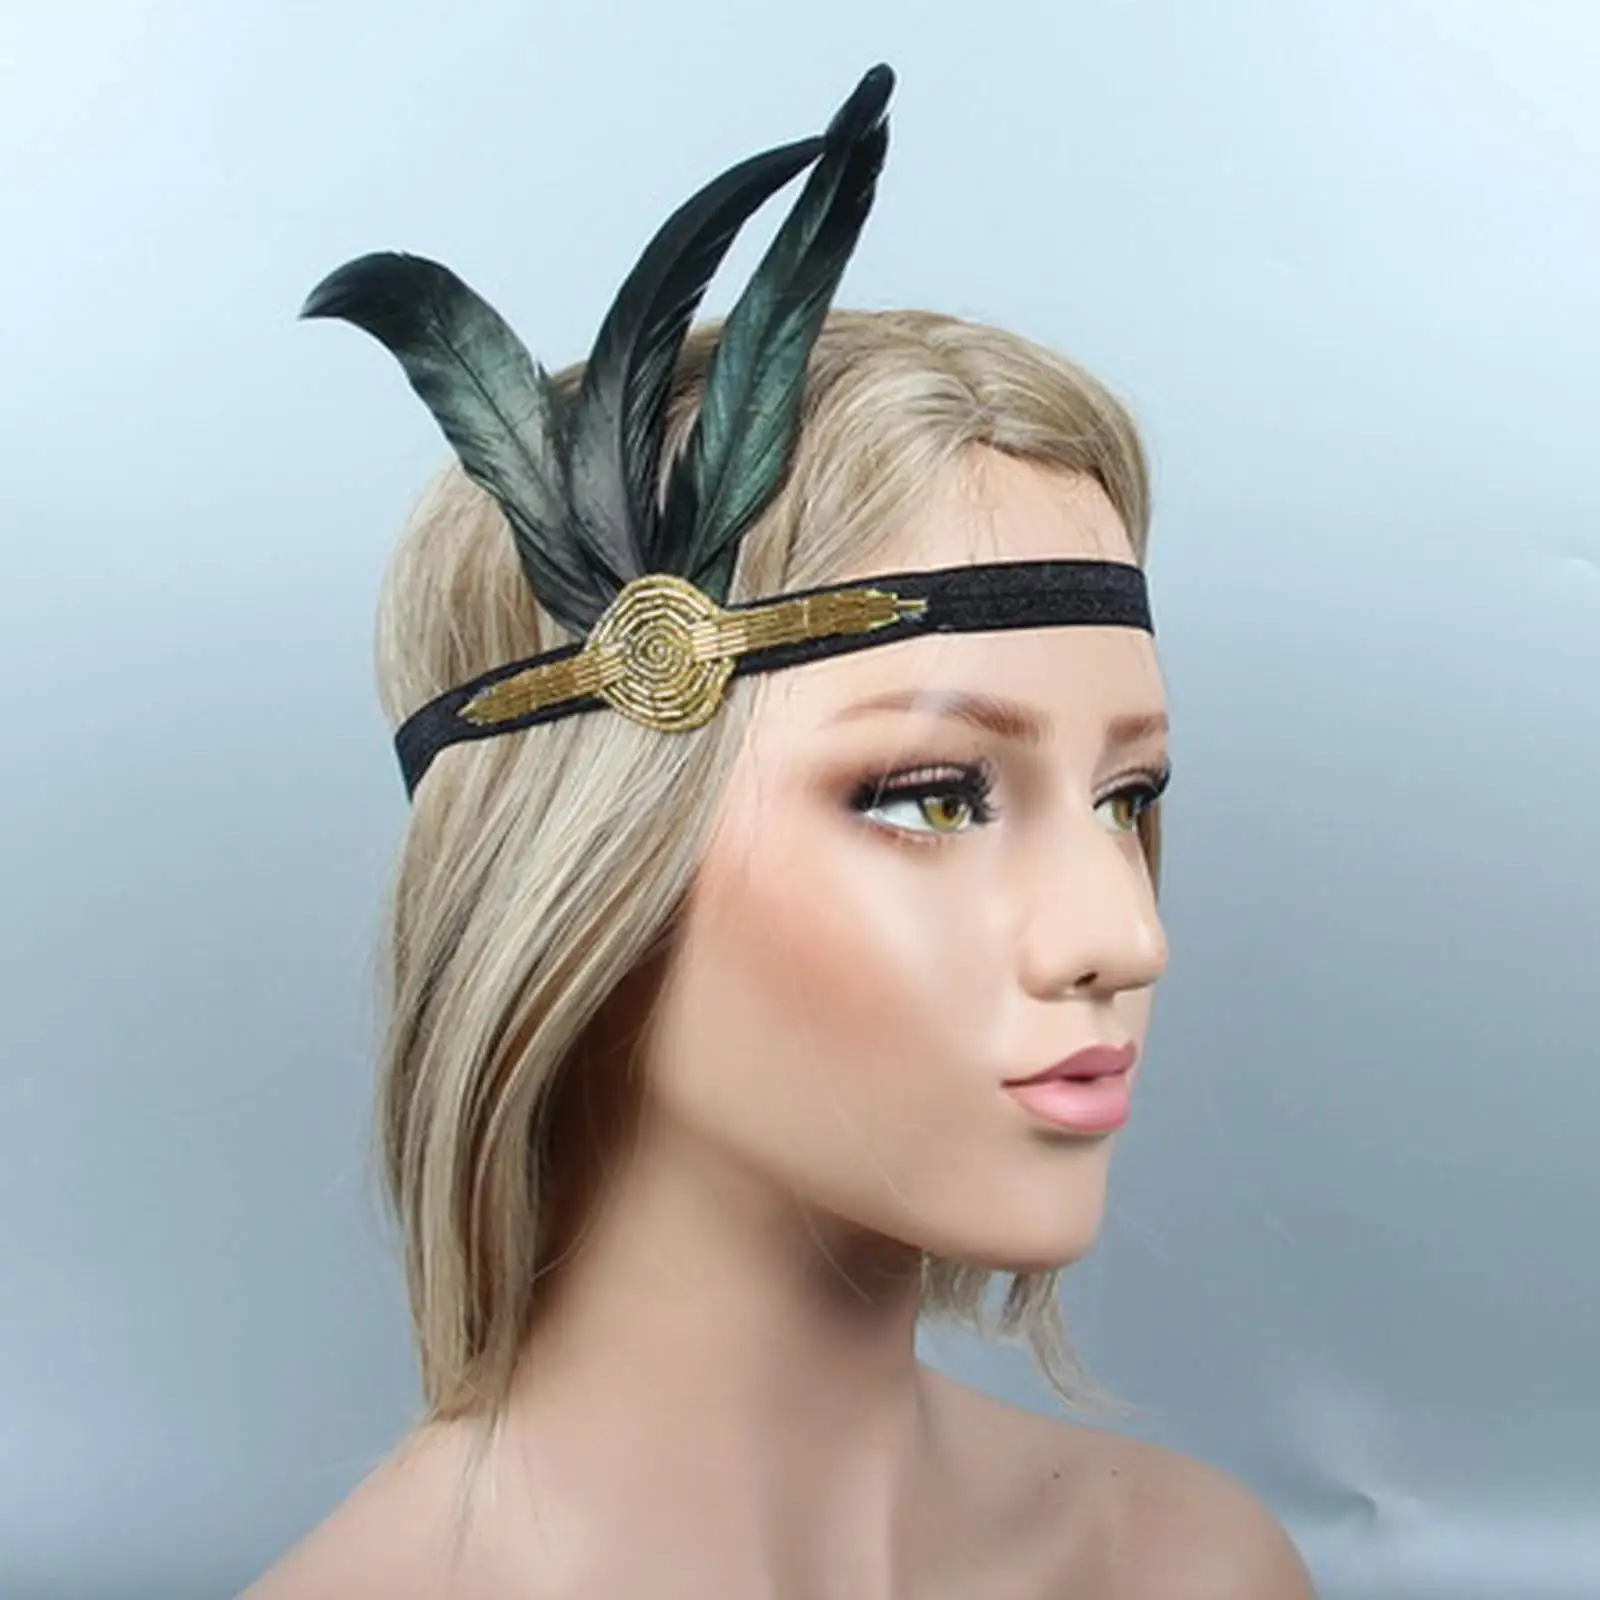 Vintage Appearance 1920S Black Feather Flapper Applique Headband Handmade for Themed Party Halloween Decor Stylish Elastic Size